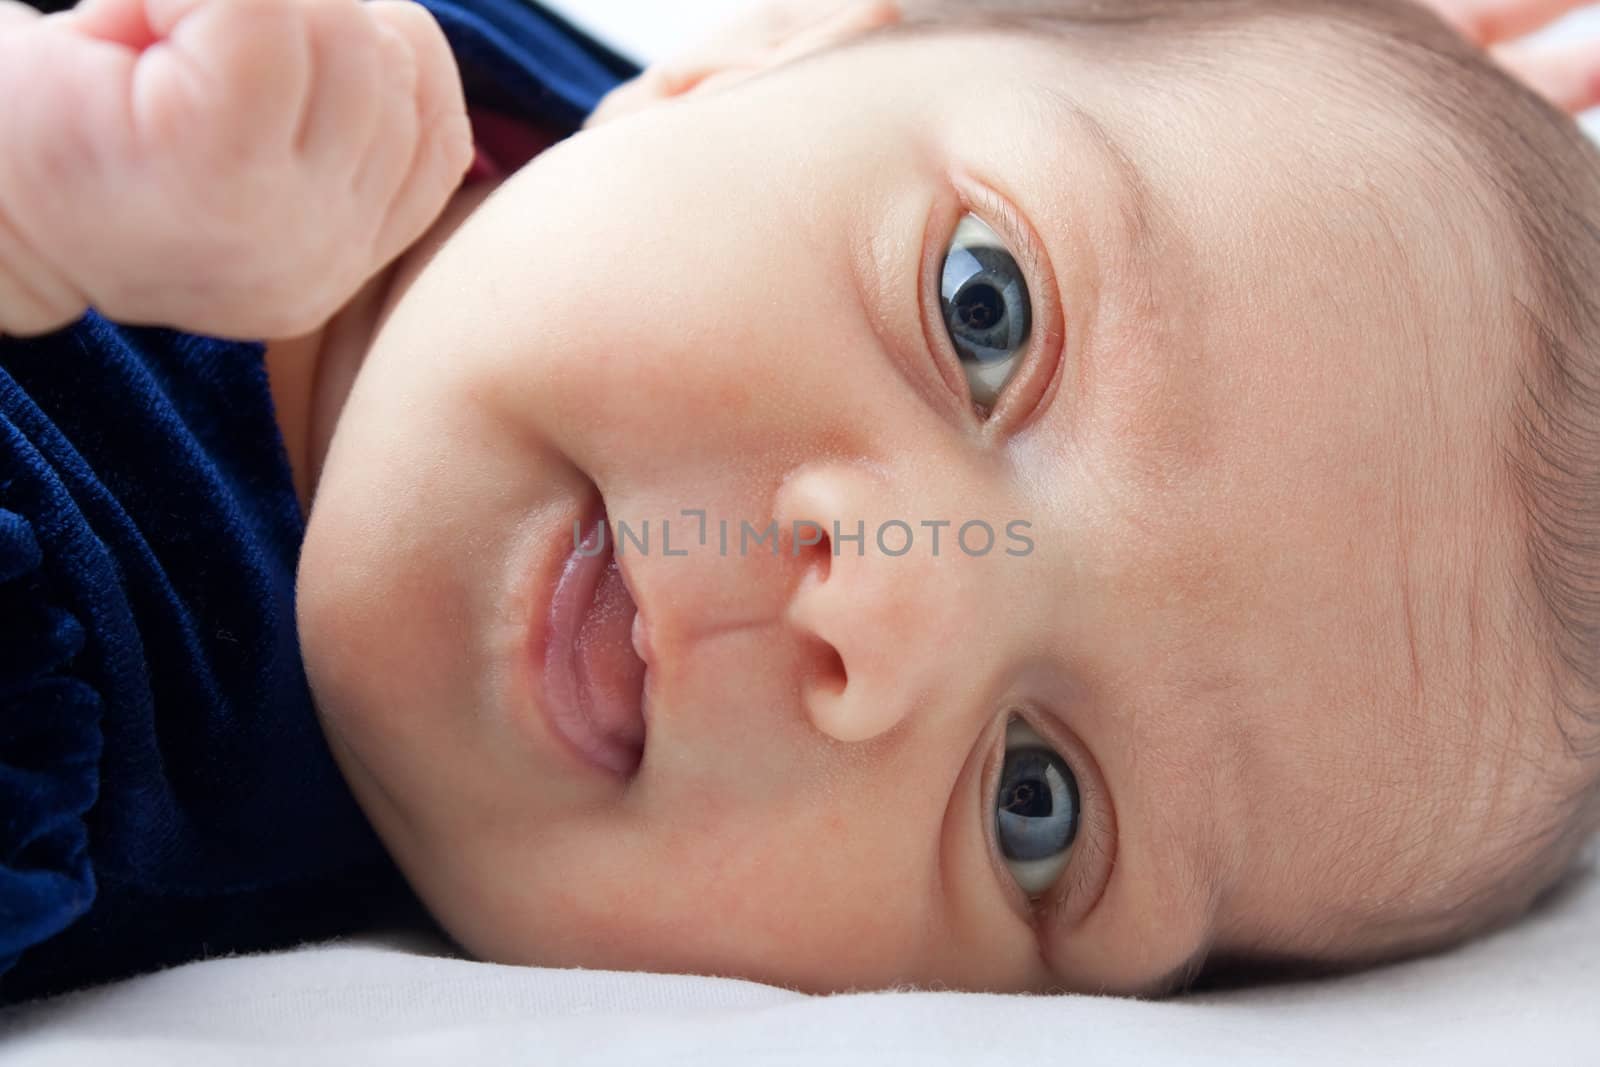 A cute newborn baby girl happily smiling and sticking out her tongue.